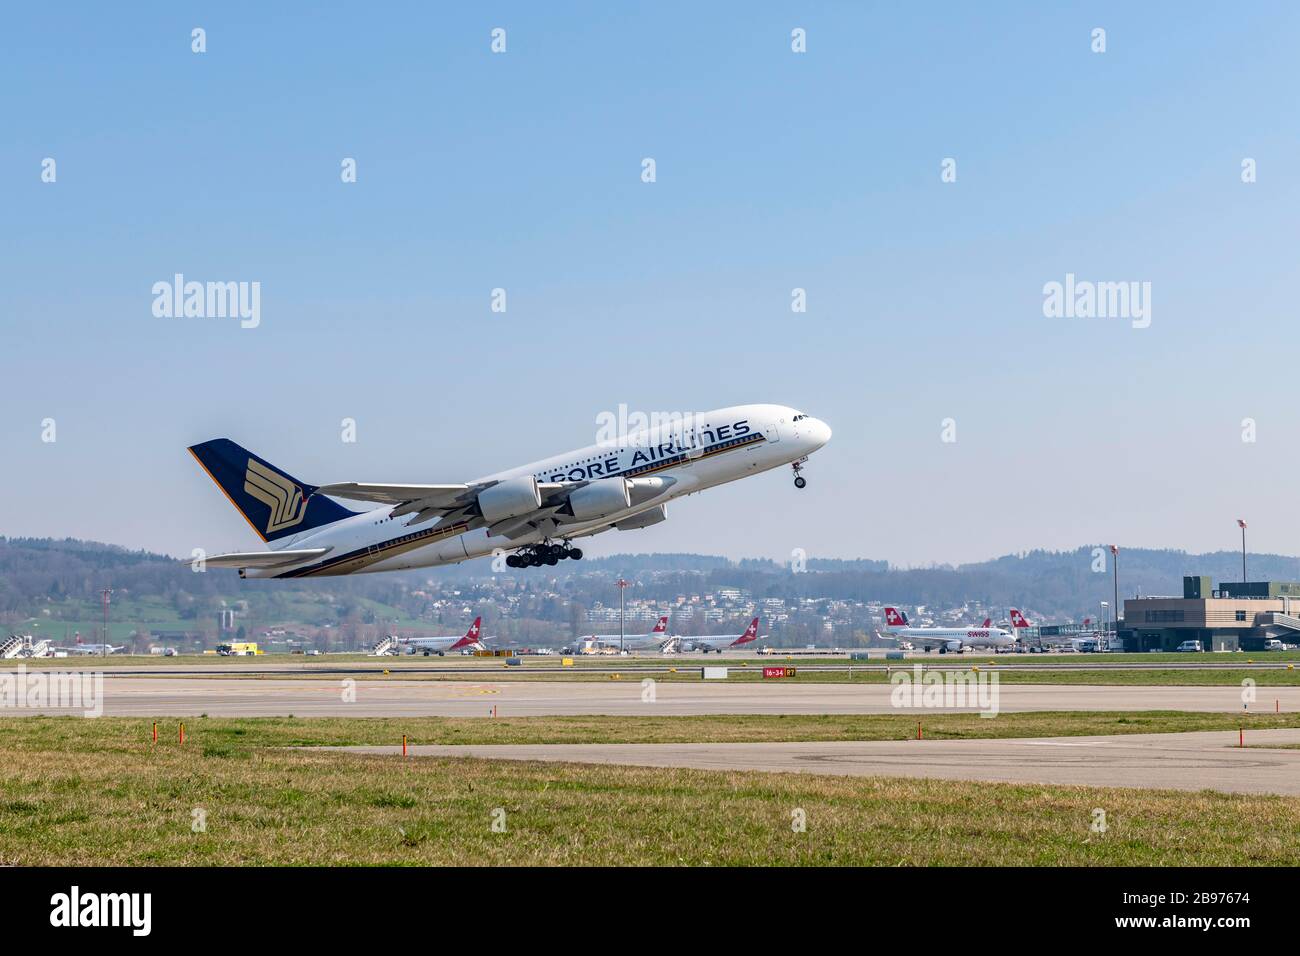 Singapore Airlines' Airbus A380-800 takes off from Zurich Airport, Switzerland Stock Photo